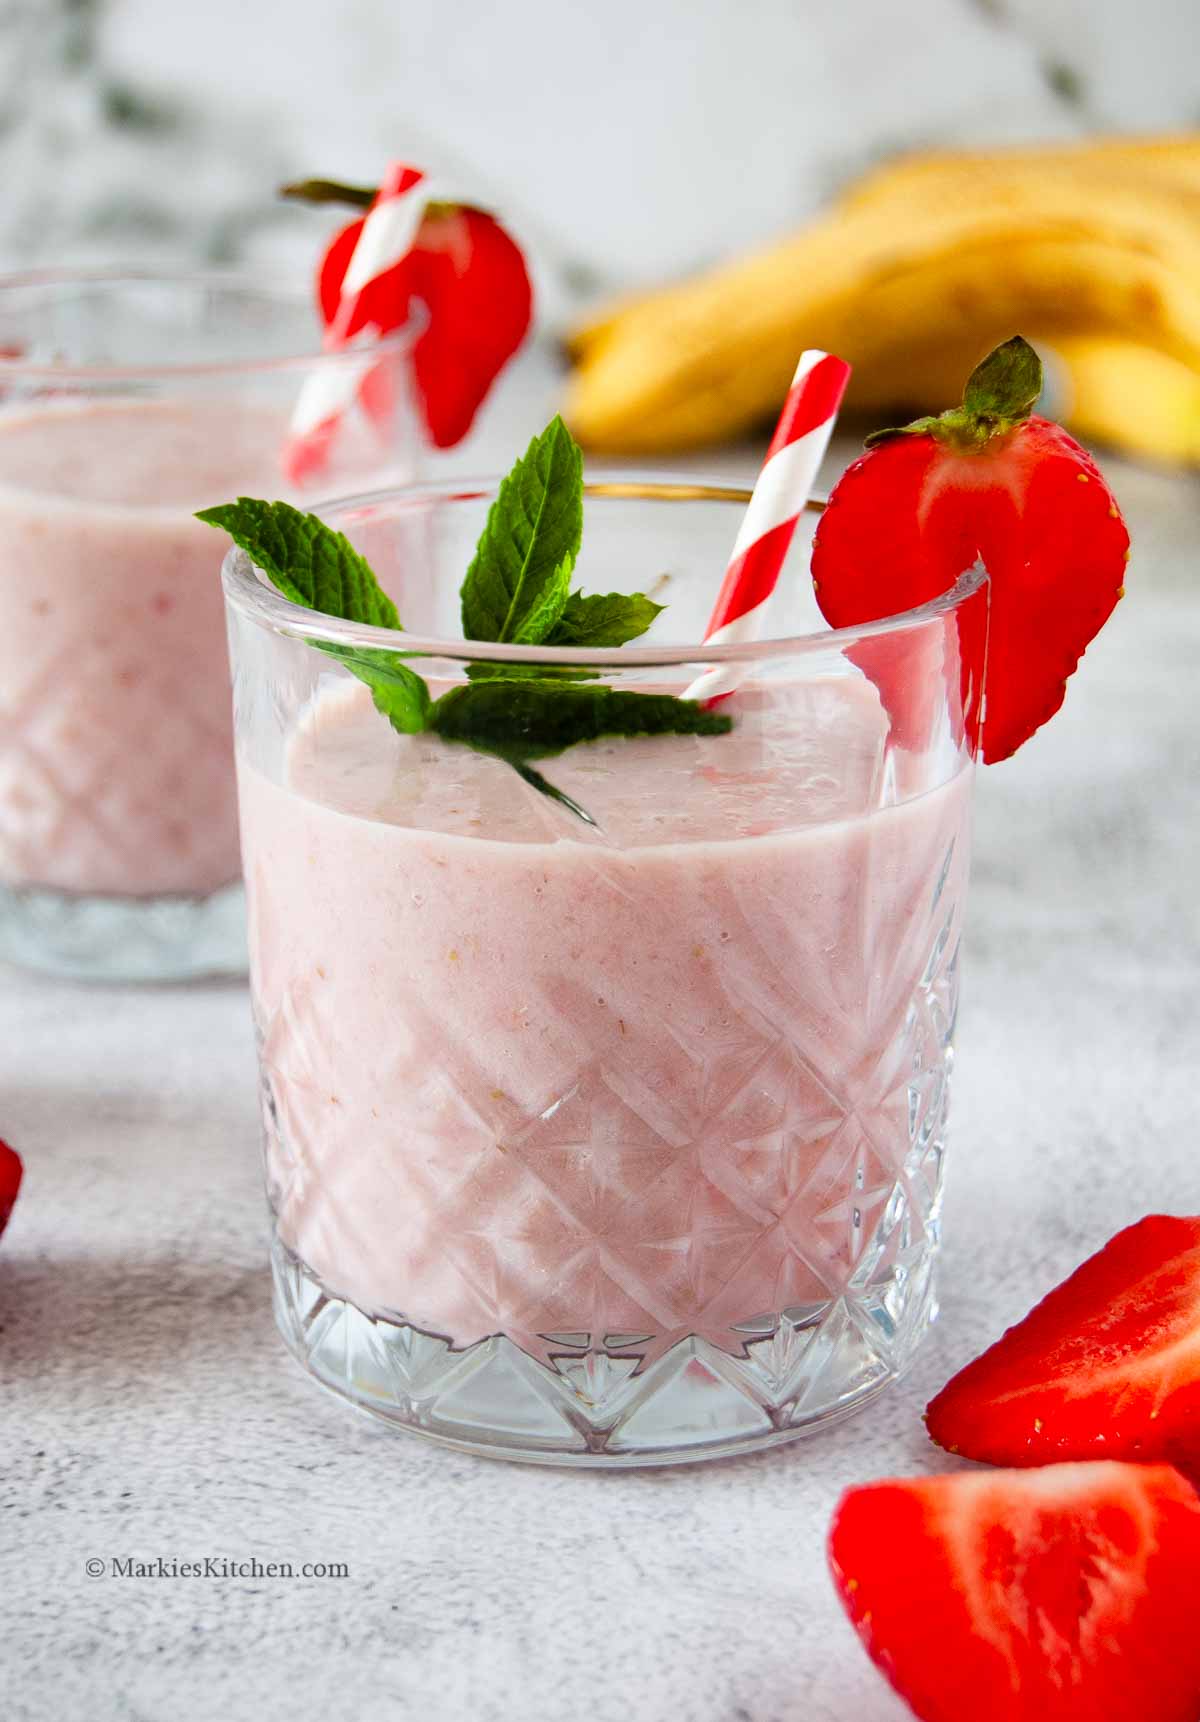 A photo of a glass with pink milky drink, garnished with sliced strawberry, mint leaves and red and white straw. Behind it, there are a few ripe bananas and in the front, there is a halved strawberry.